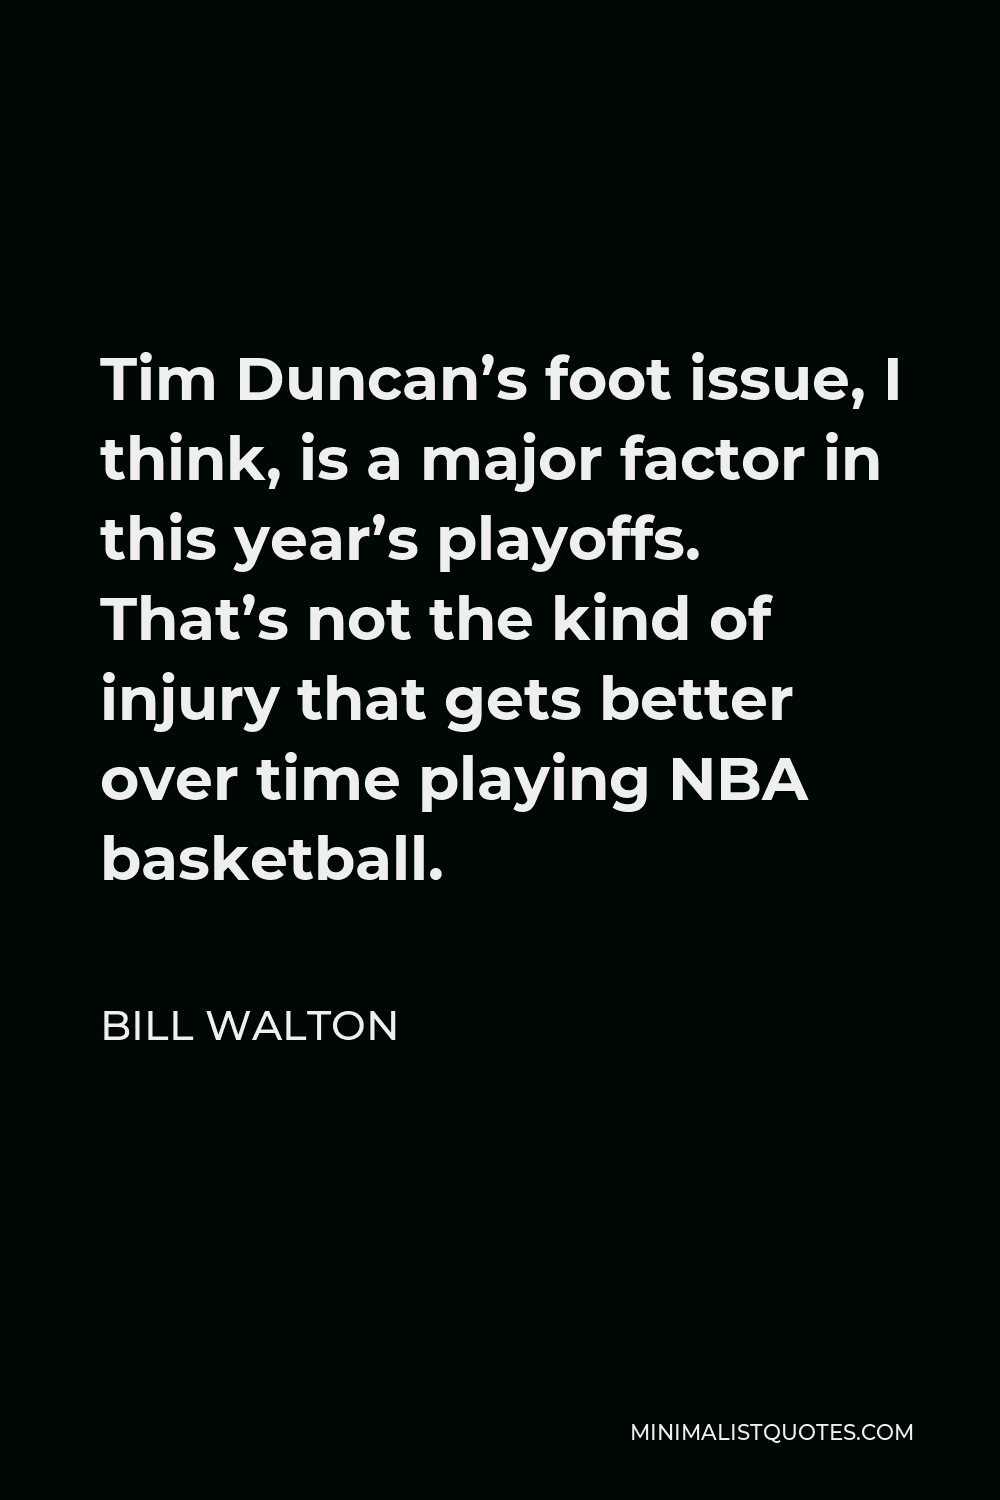 Bill Walton Quote - Tim Duncan’s foot issue, I think, is a major factor in this year’s playoffs. That’s not the kind of injury that gets better over time playing NBA basketball.